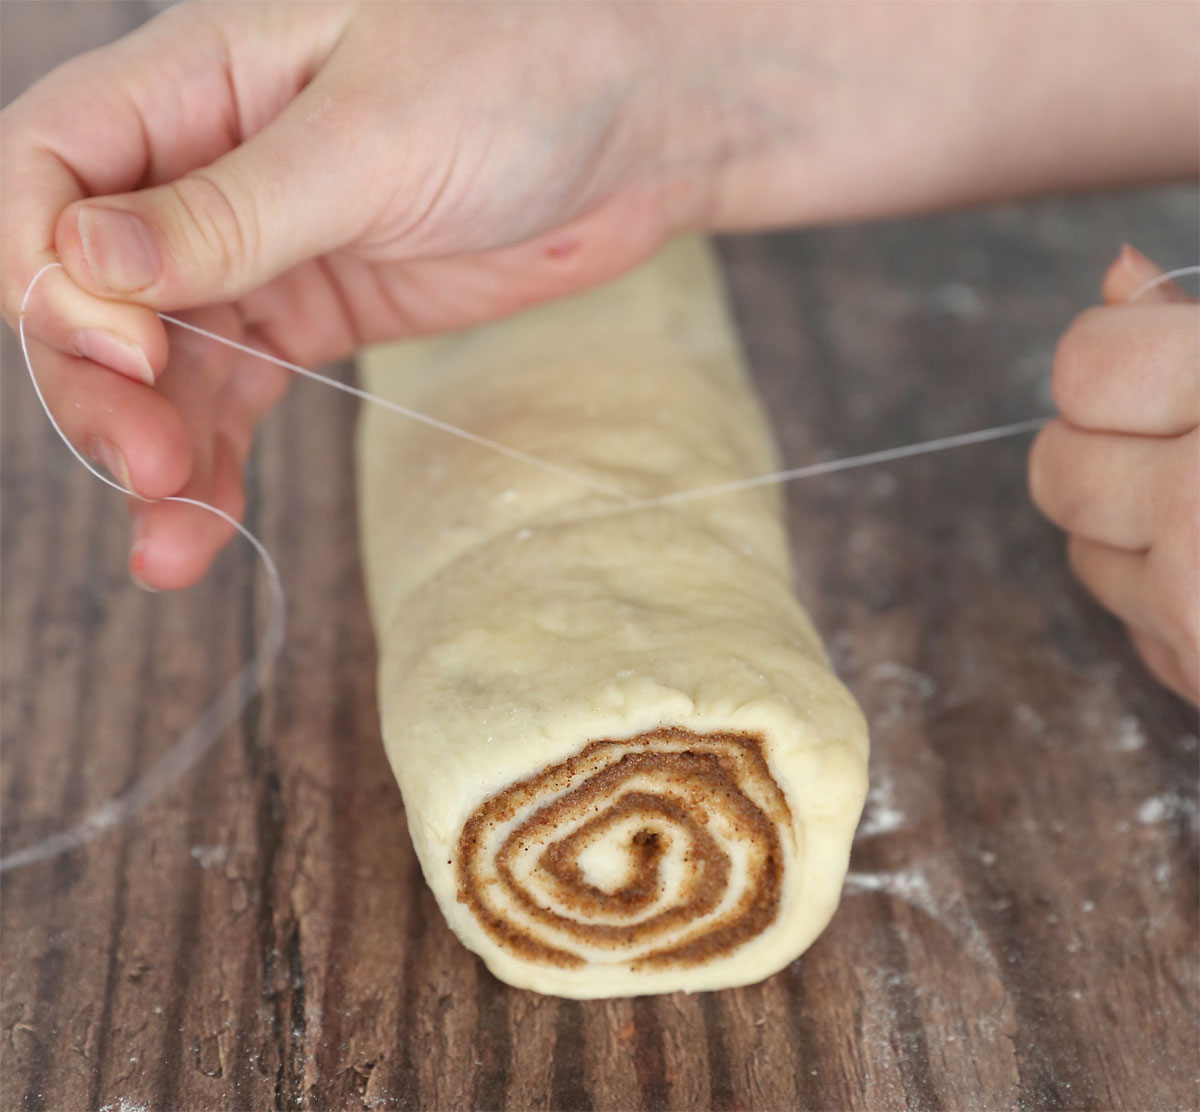 Hands using thread to cut a roll of dough into cinnamon rolls